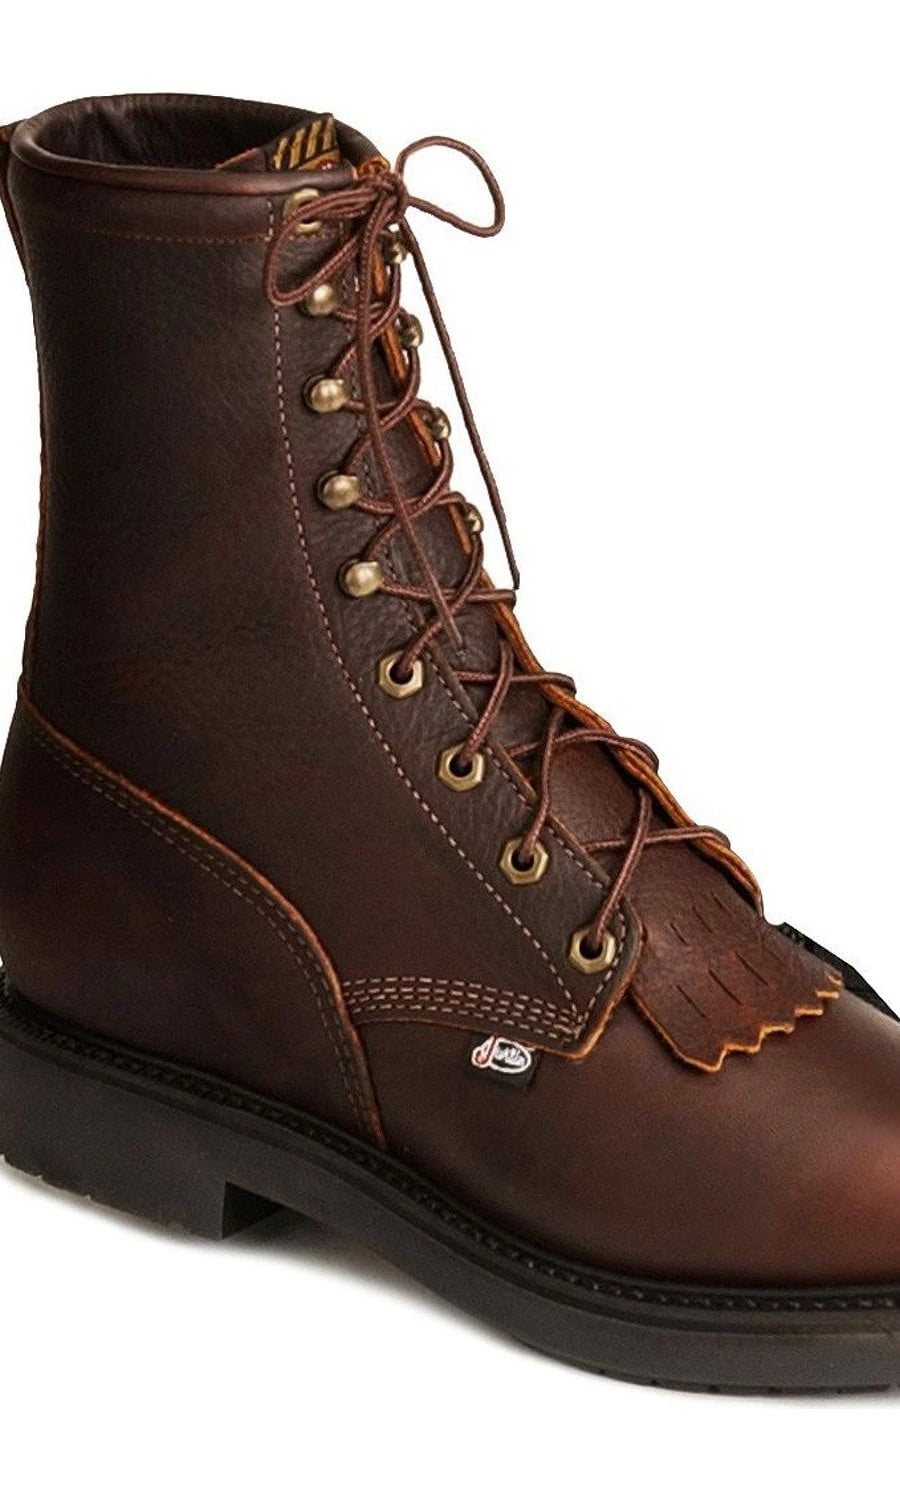 justin men's double comfort lacer work boots